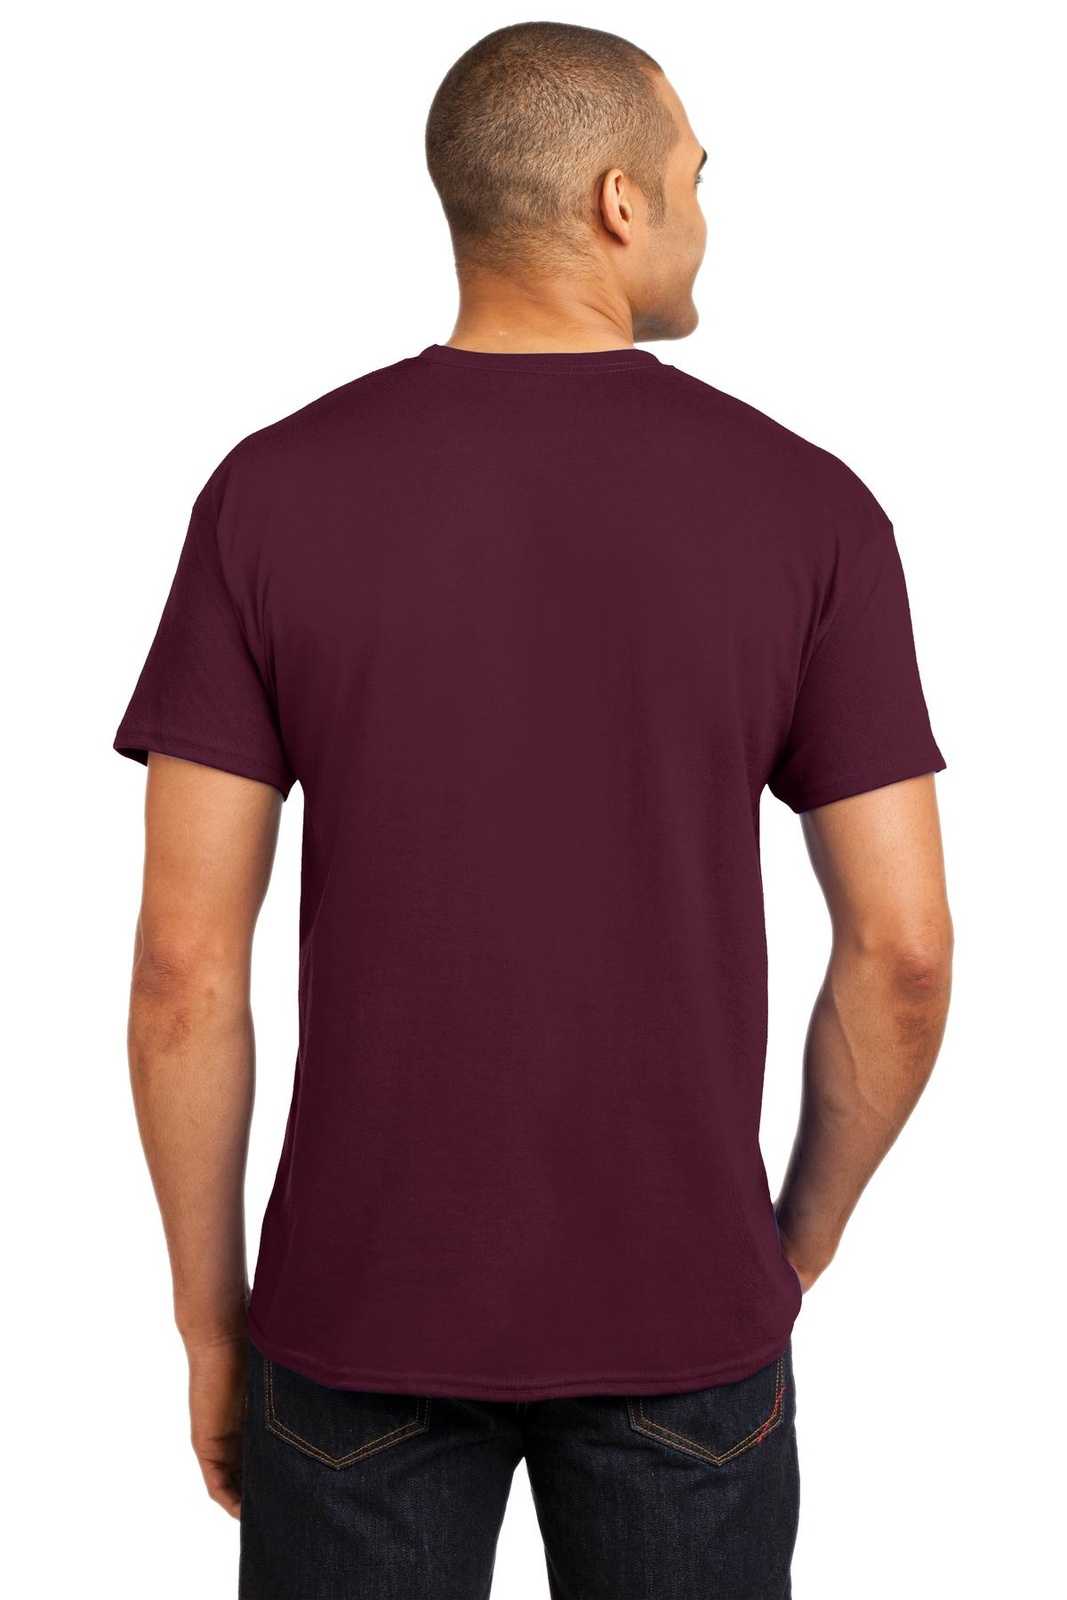 Hanes 5170 Ecosmart 50/50 Cotton/Poly T-Shirt - Maroon - HIT a Double